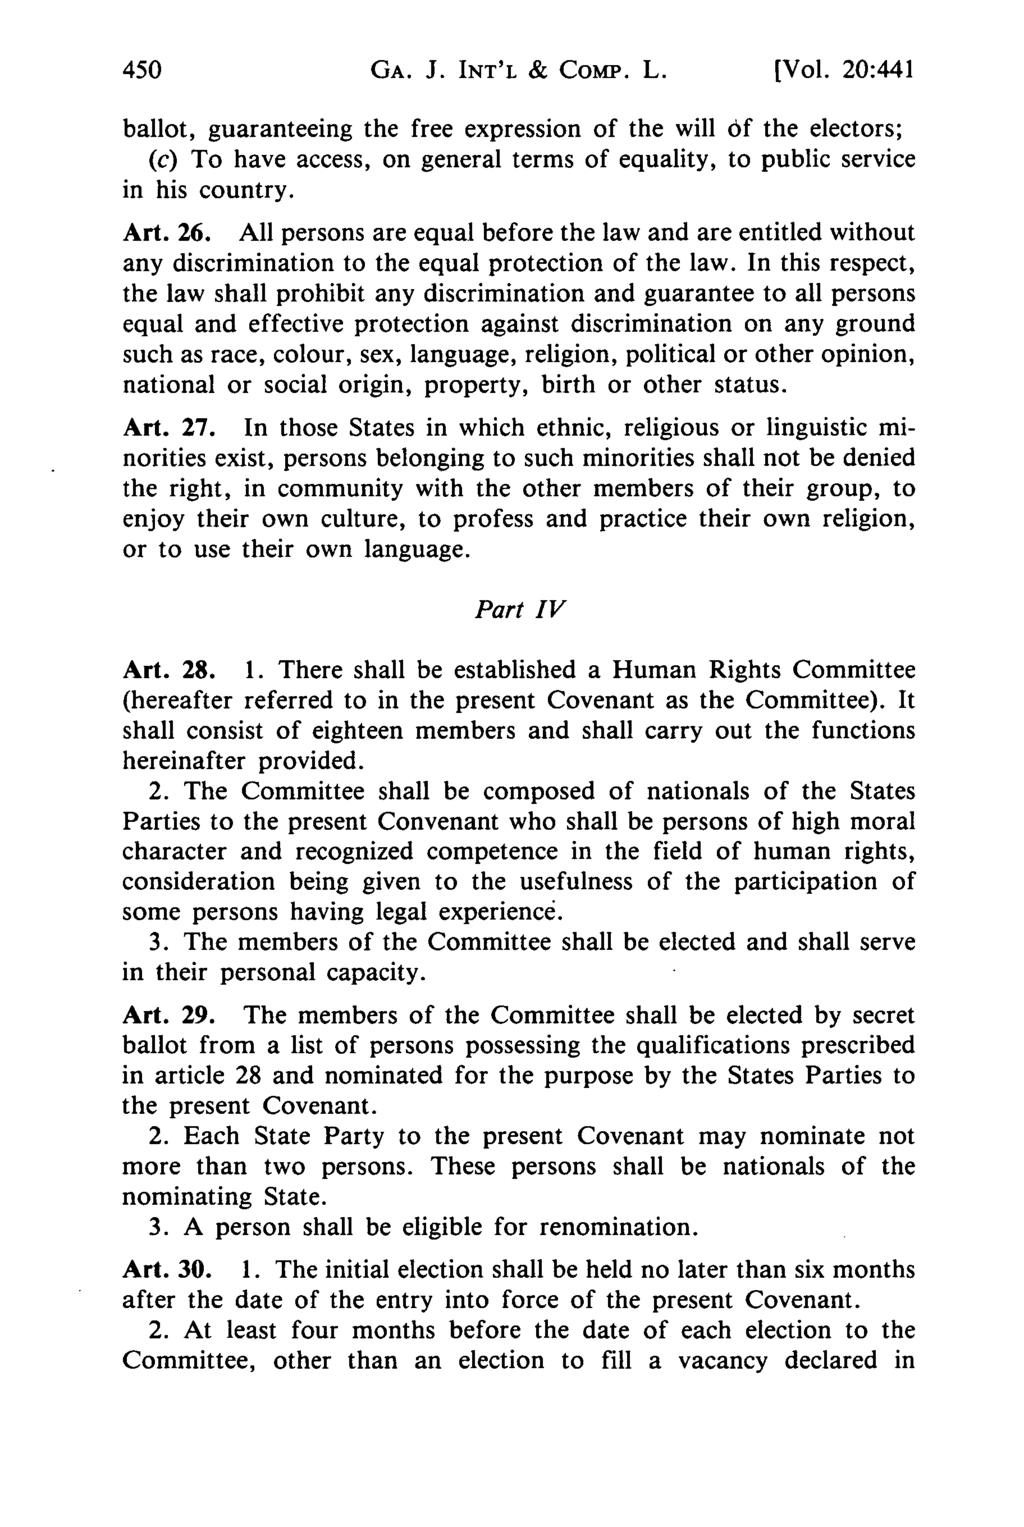 GA. J. INT'L & CoMP. L. [Vol. 20:441 ballot, guaranteeing the free expression of the will Of the electors; (c) To have access, on general terms of equality, to public service in his country. Art. 26.